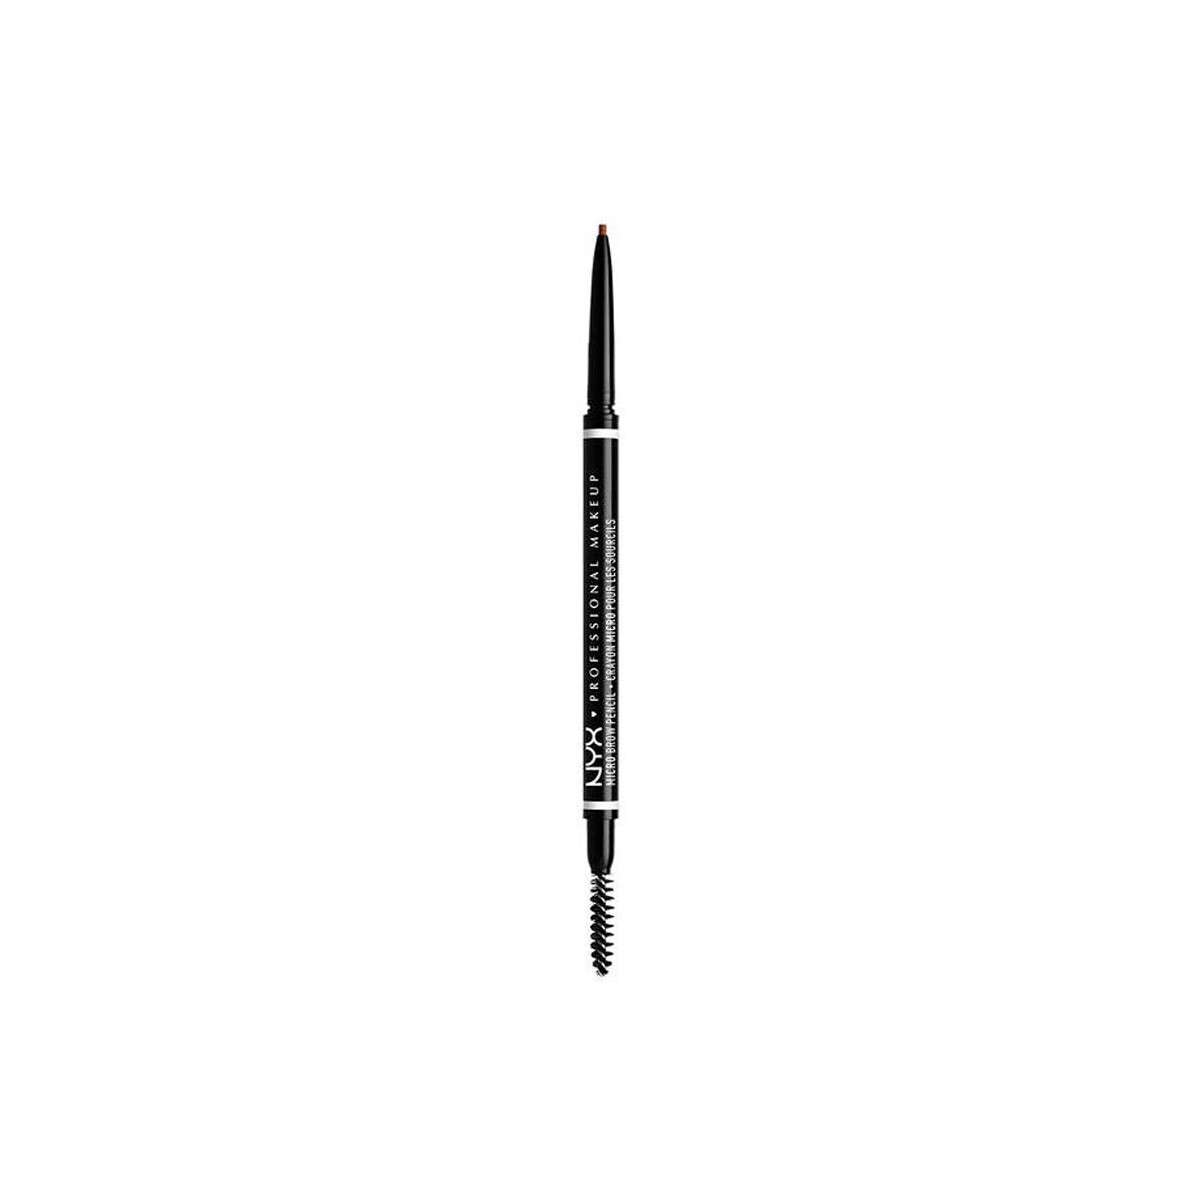 Beauté Femme Maquillage Sourcils Nyx Professional Make Up Micro Brow Pencil chocolate 